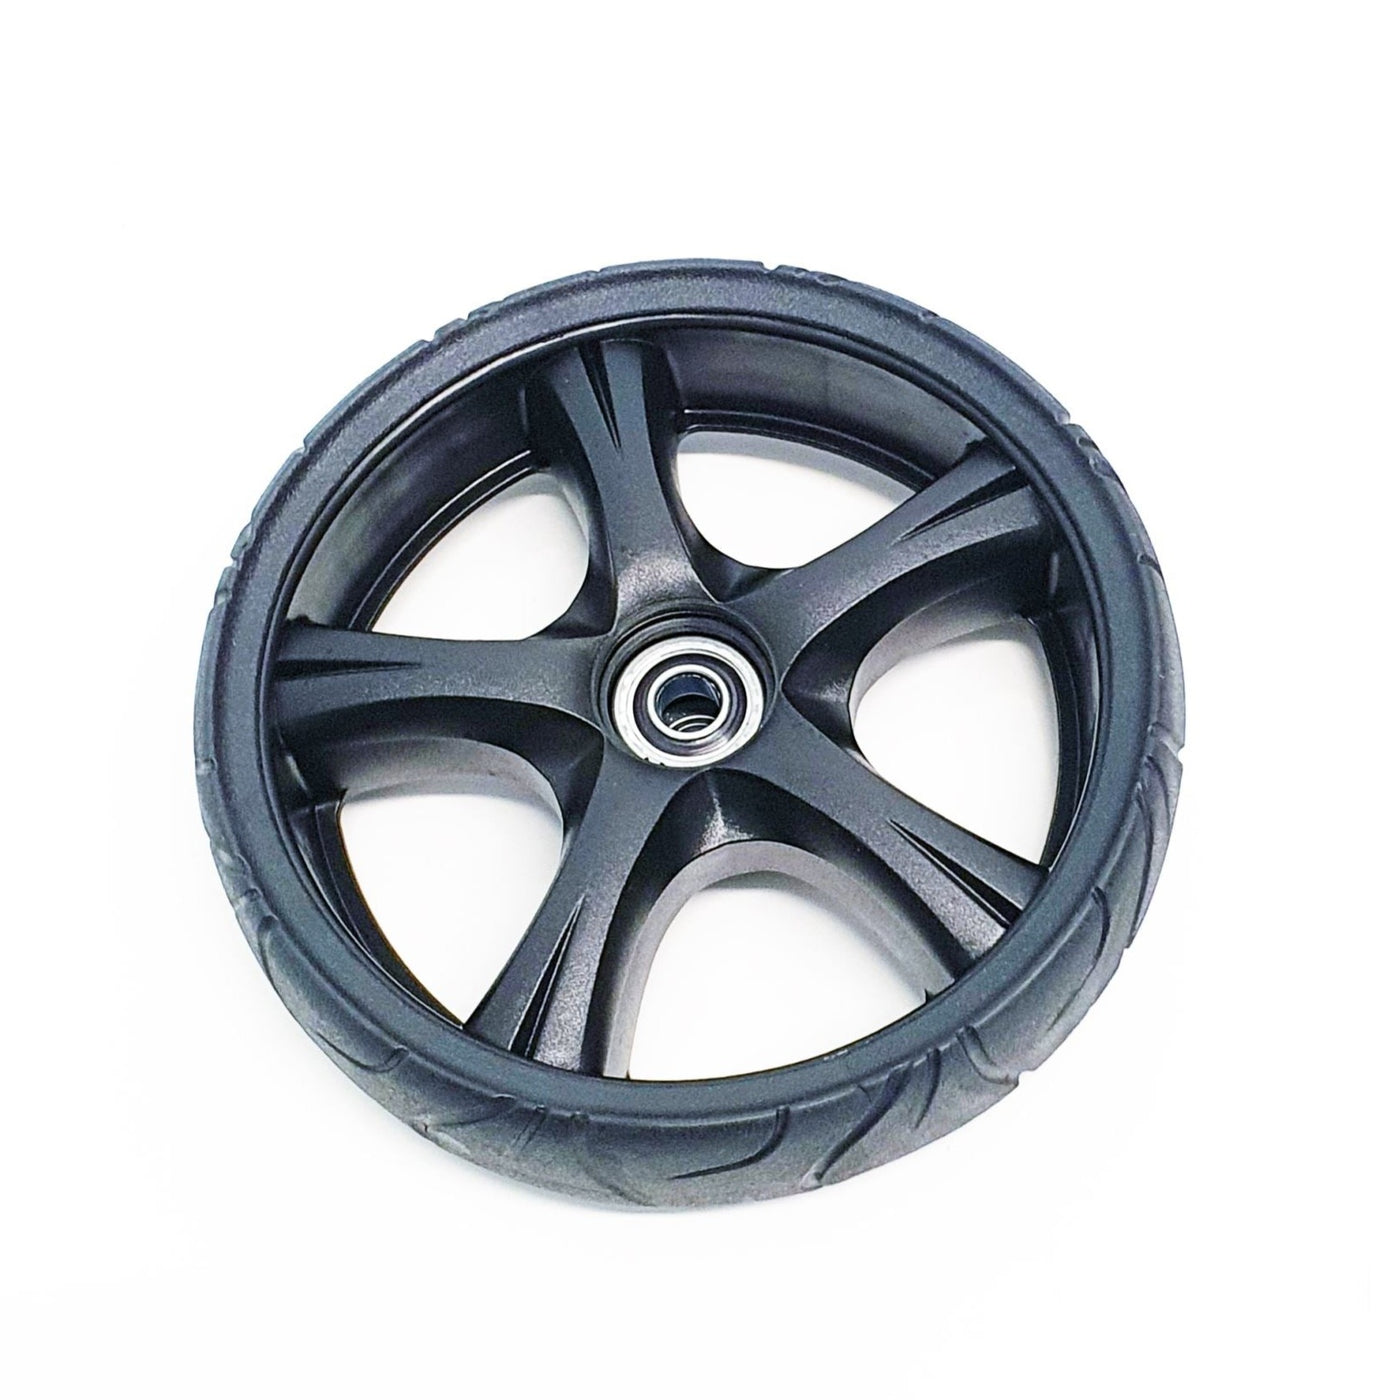 Masport 200mm Universal Mag Front and Rear Wheel 573703